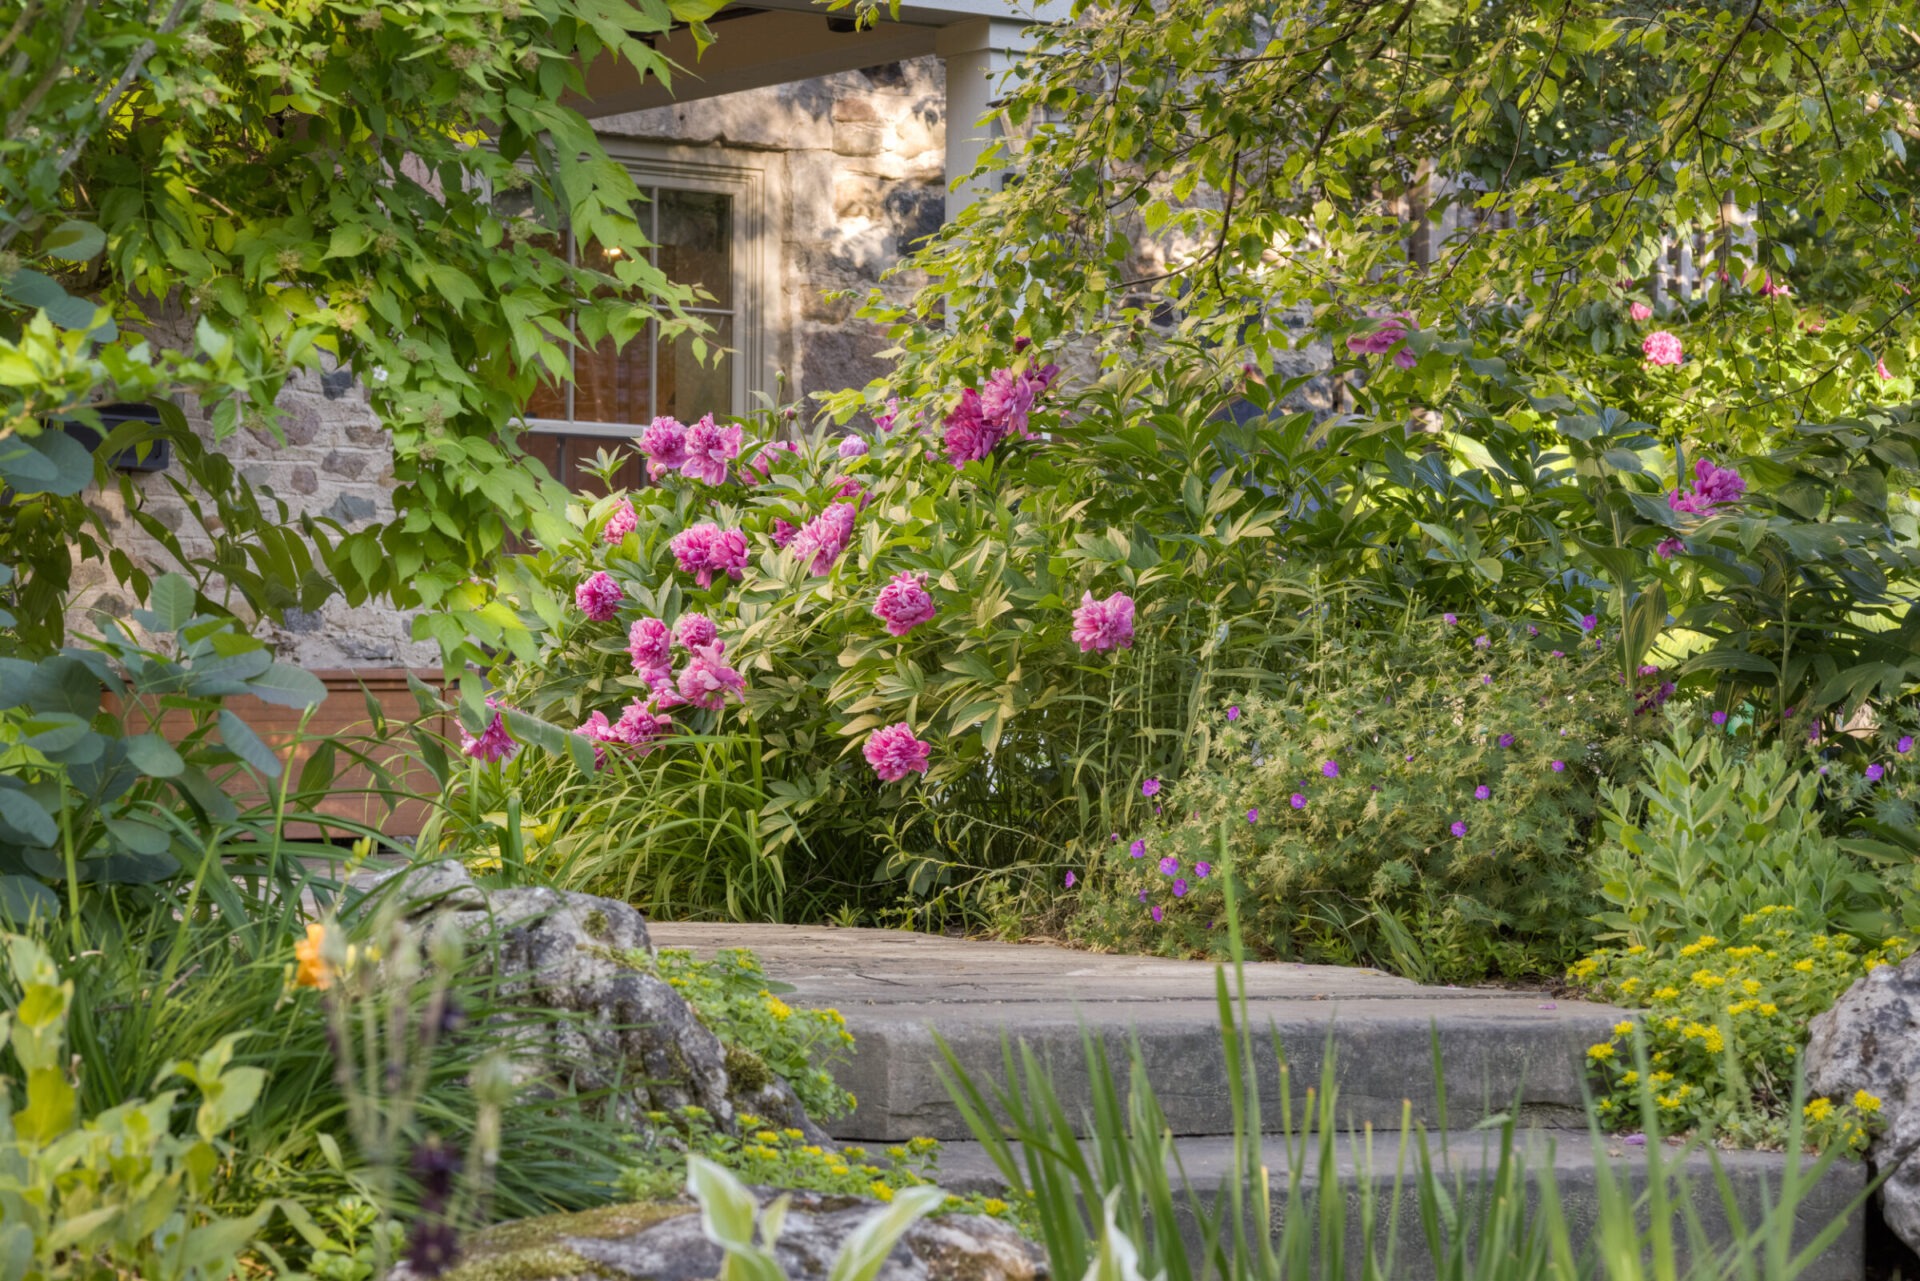 This image shows a lush garden with vibrant pink peonies, green foliage, a stone path, and part of a house with stone walls peeking through.